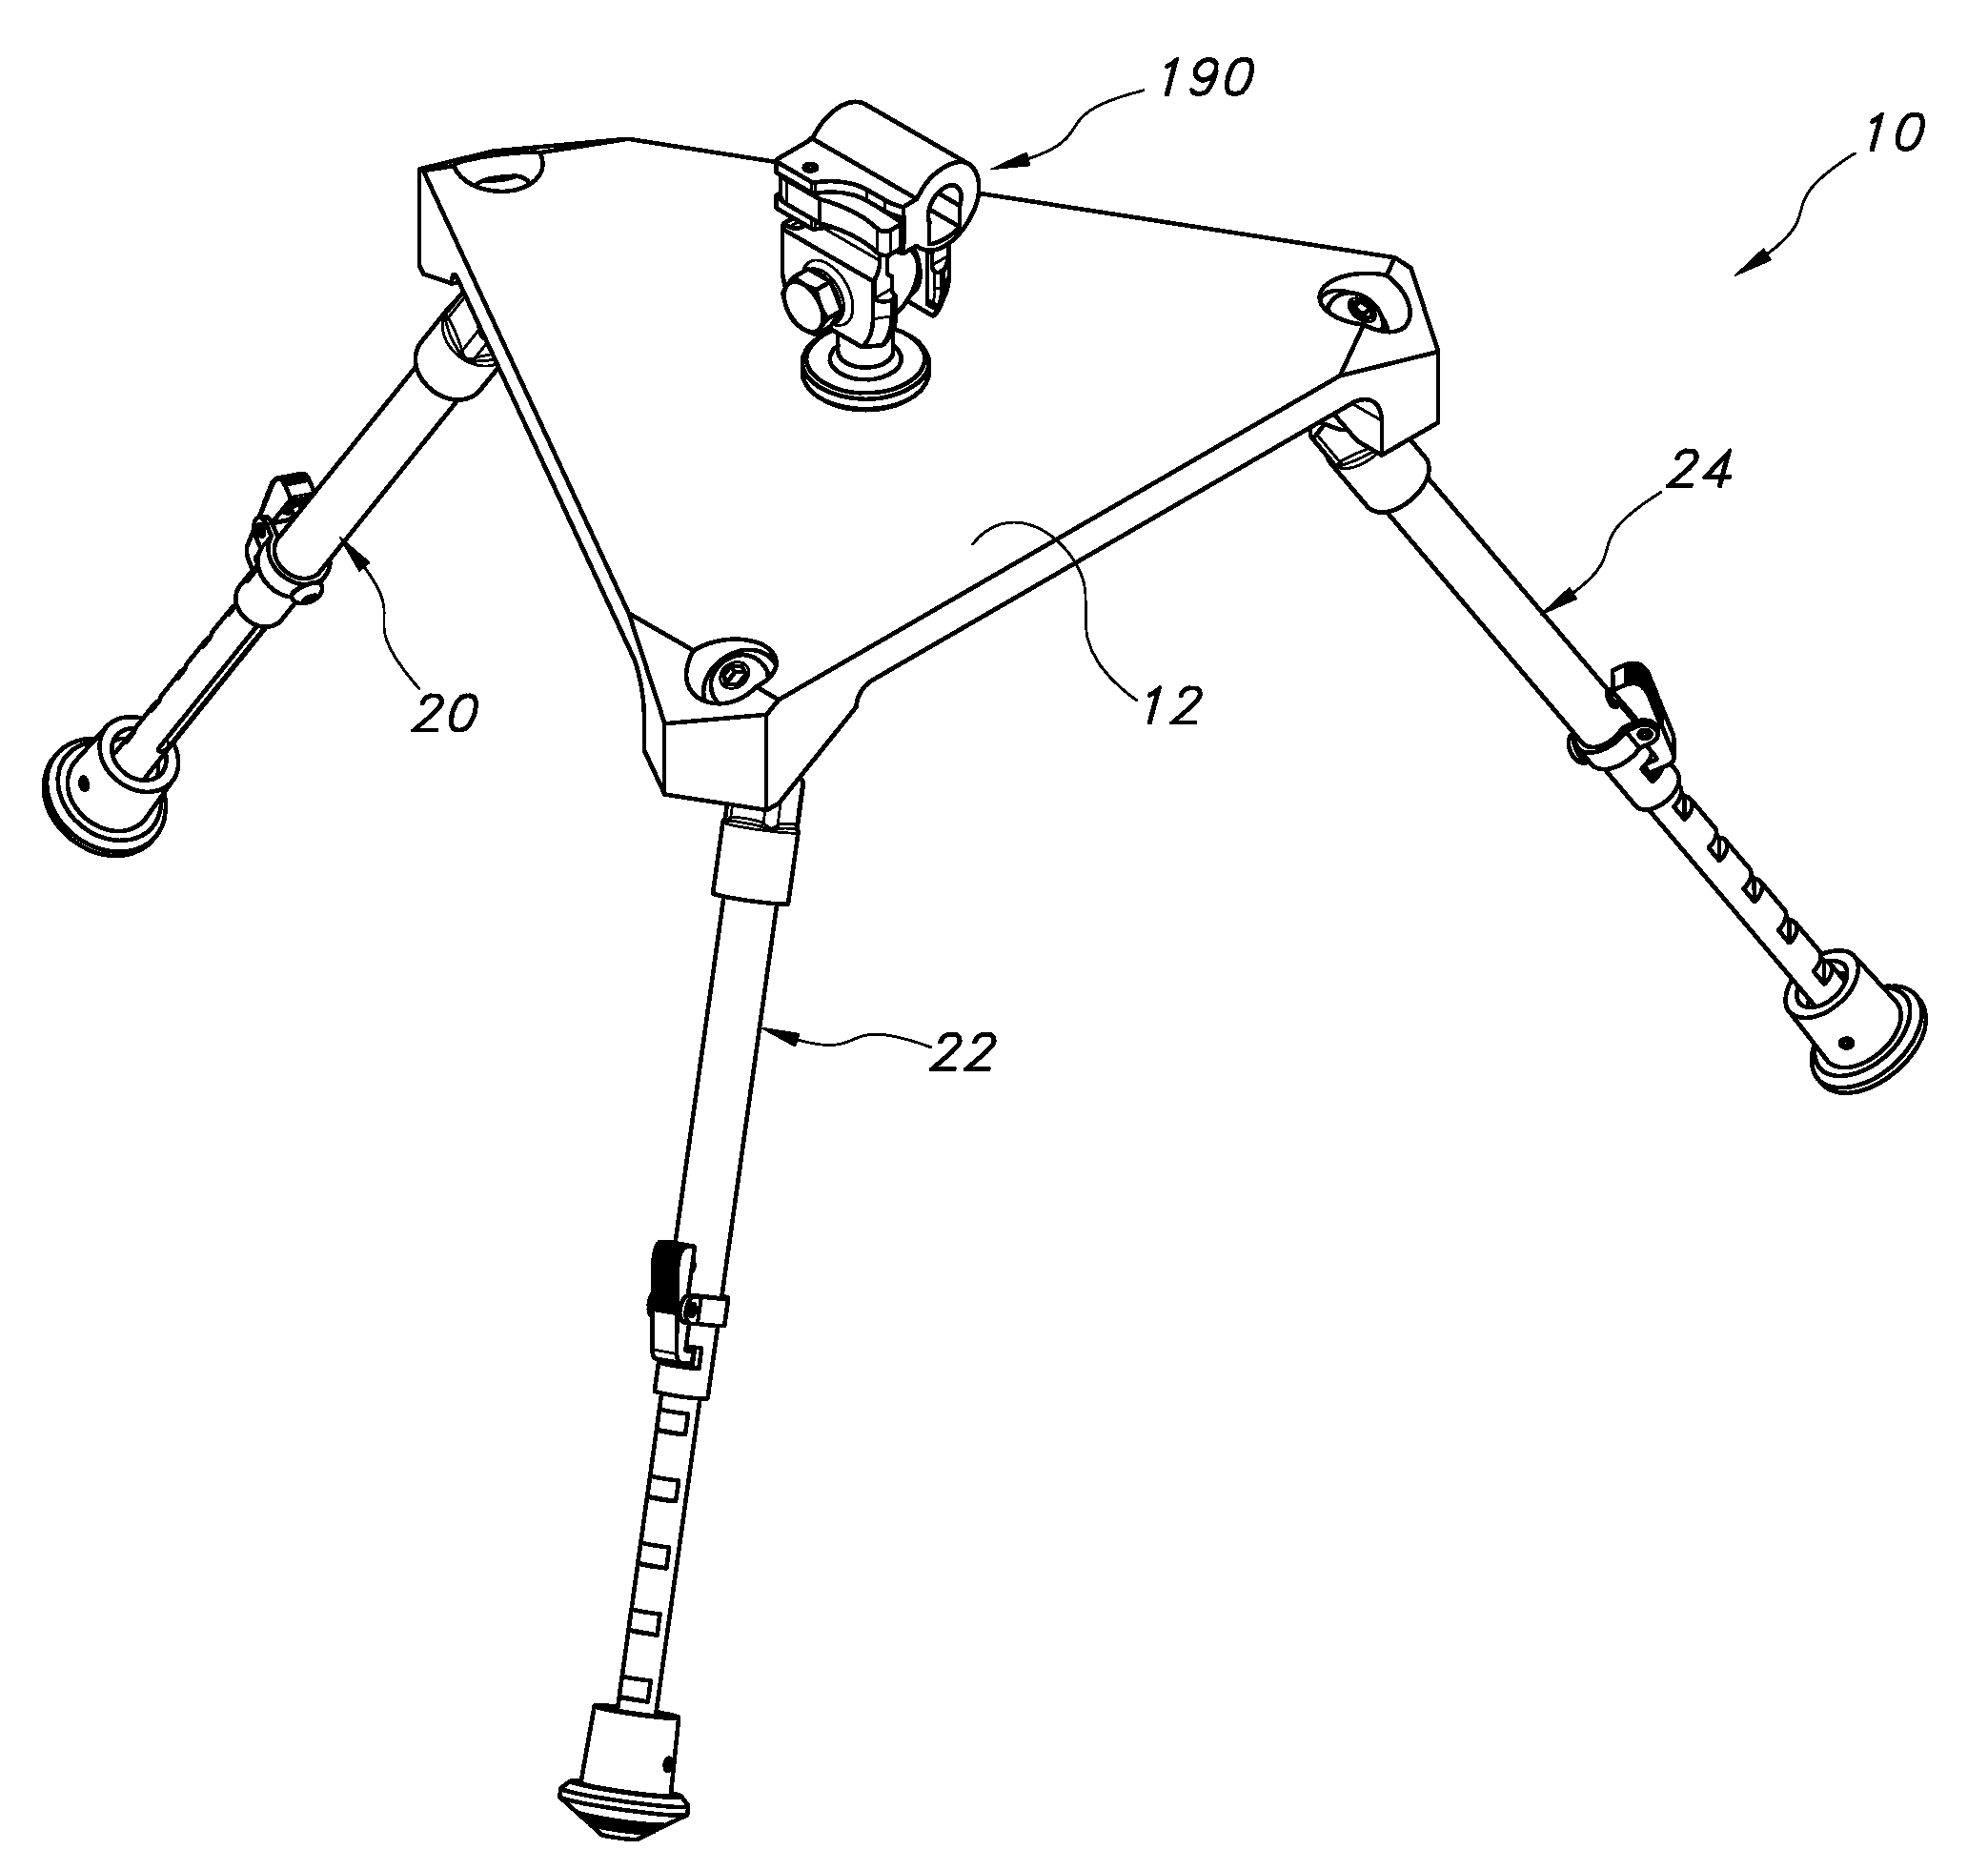 Tripod mount and clamp assembly